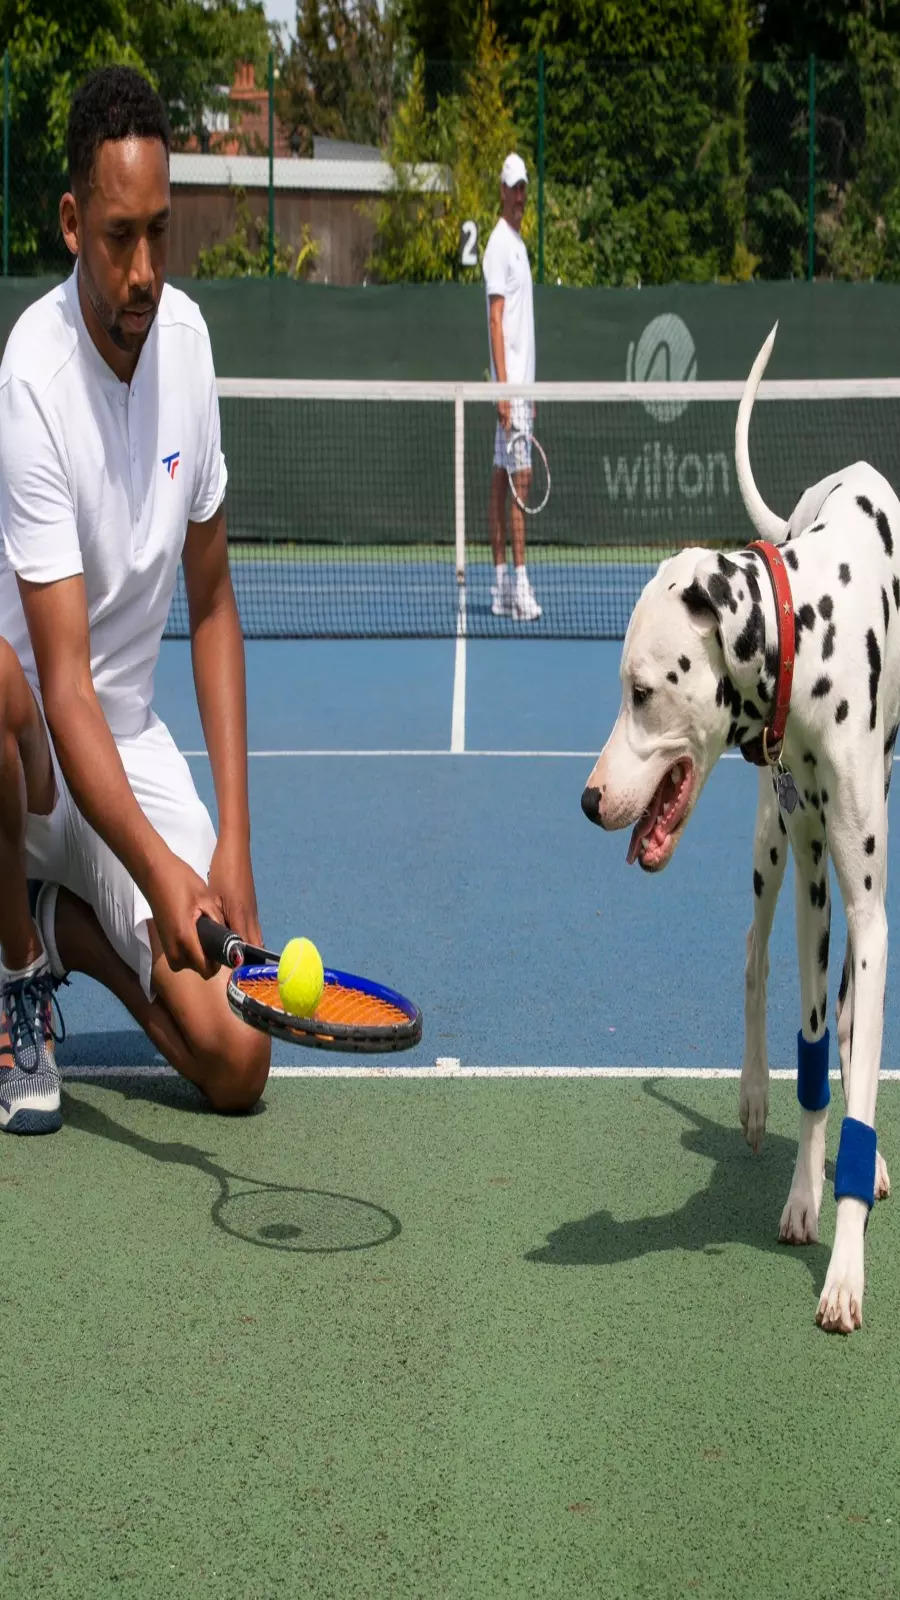 'Ball dogs' on tennis courts? Not working yet